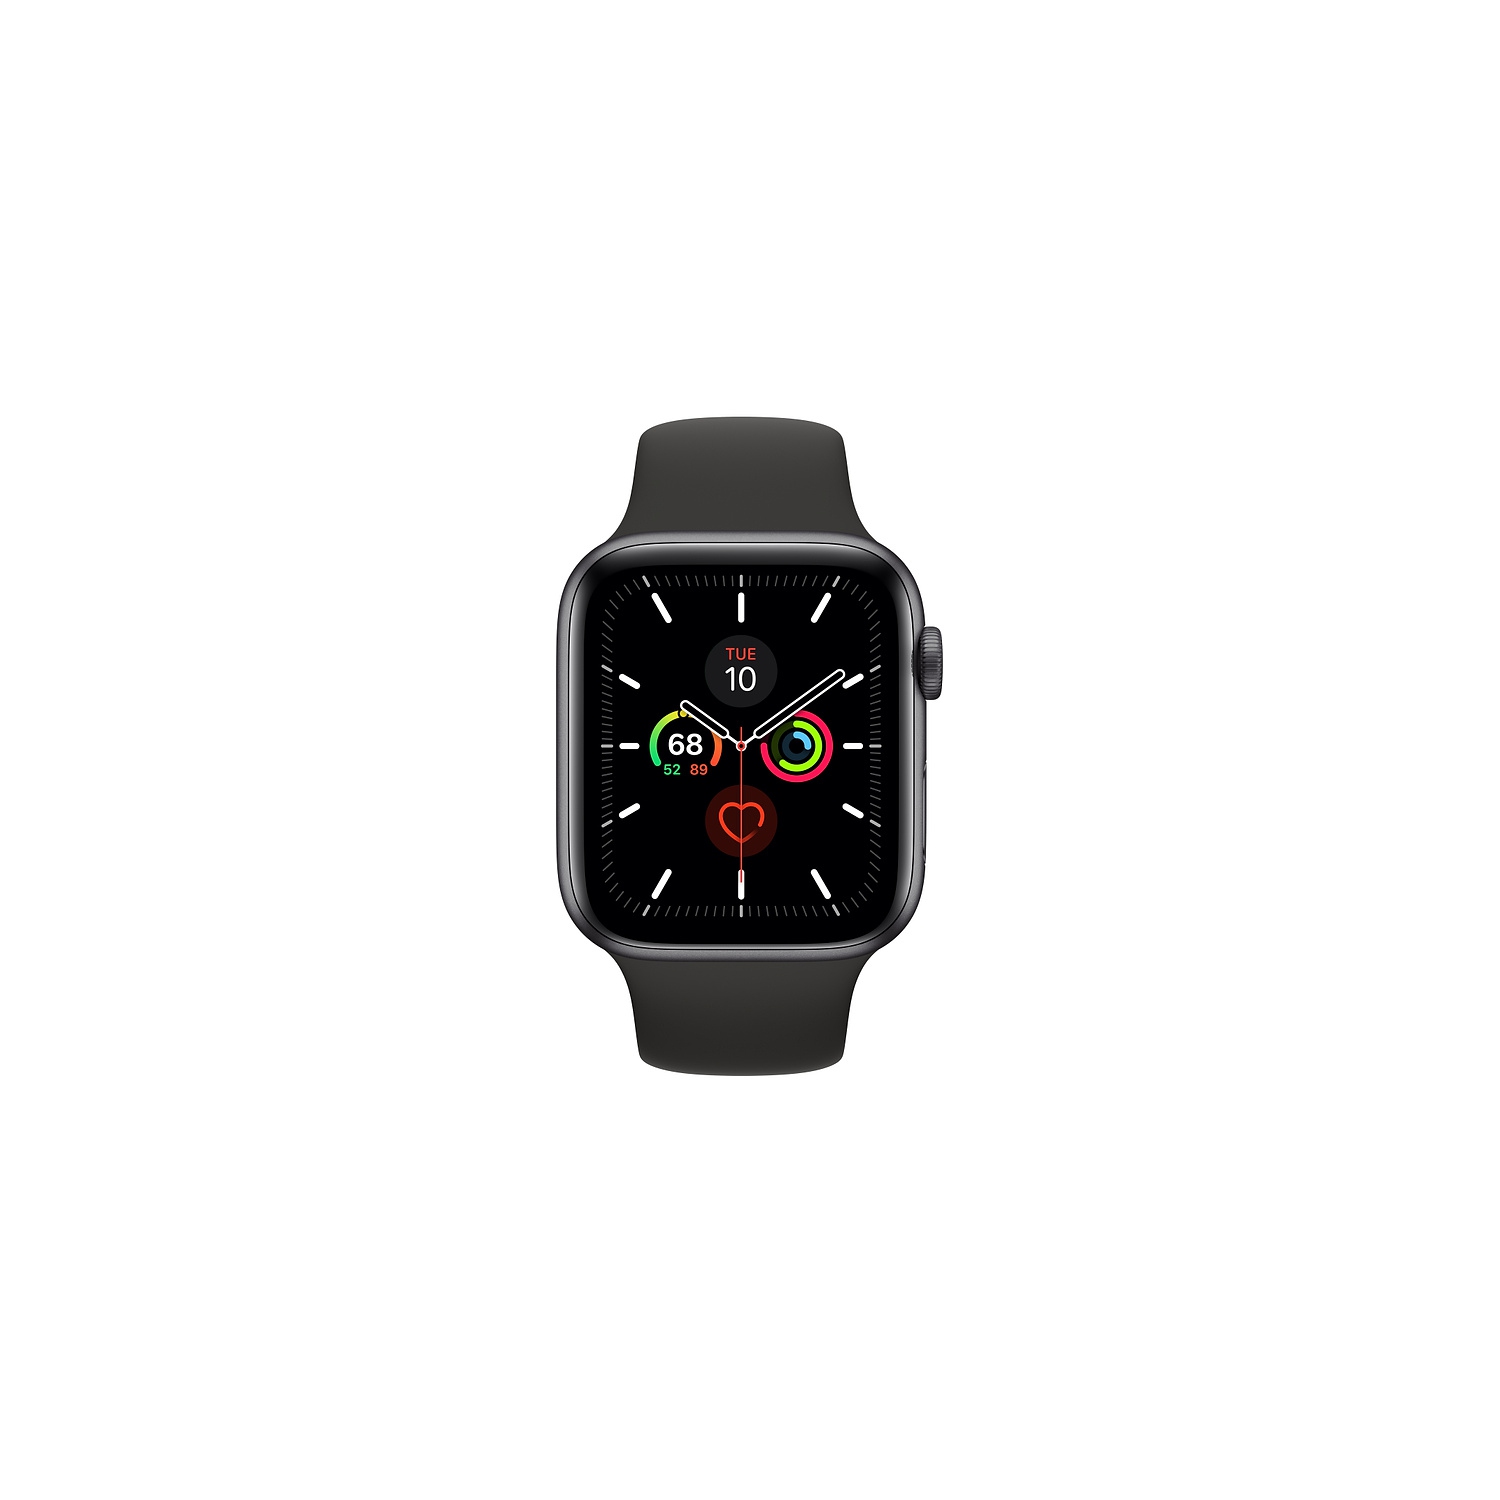 Refurbished (Good) - Apple Watch Series 5 (GPS) 44mm Space Grey Aluminum with Black Sport Band